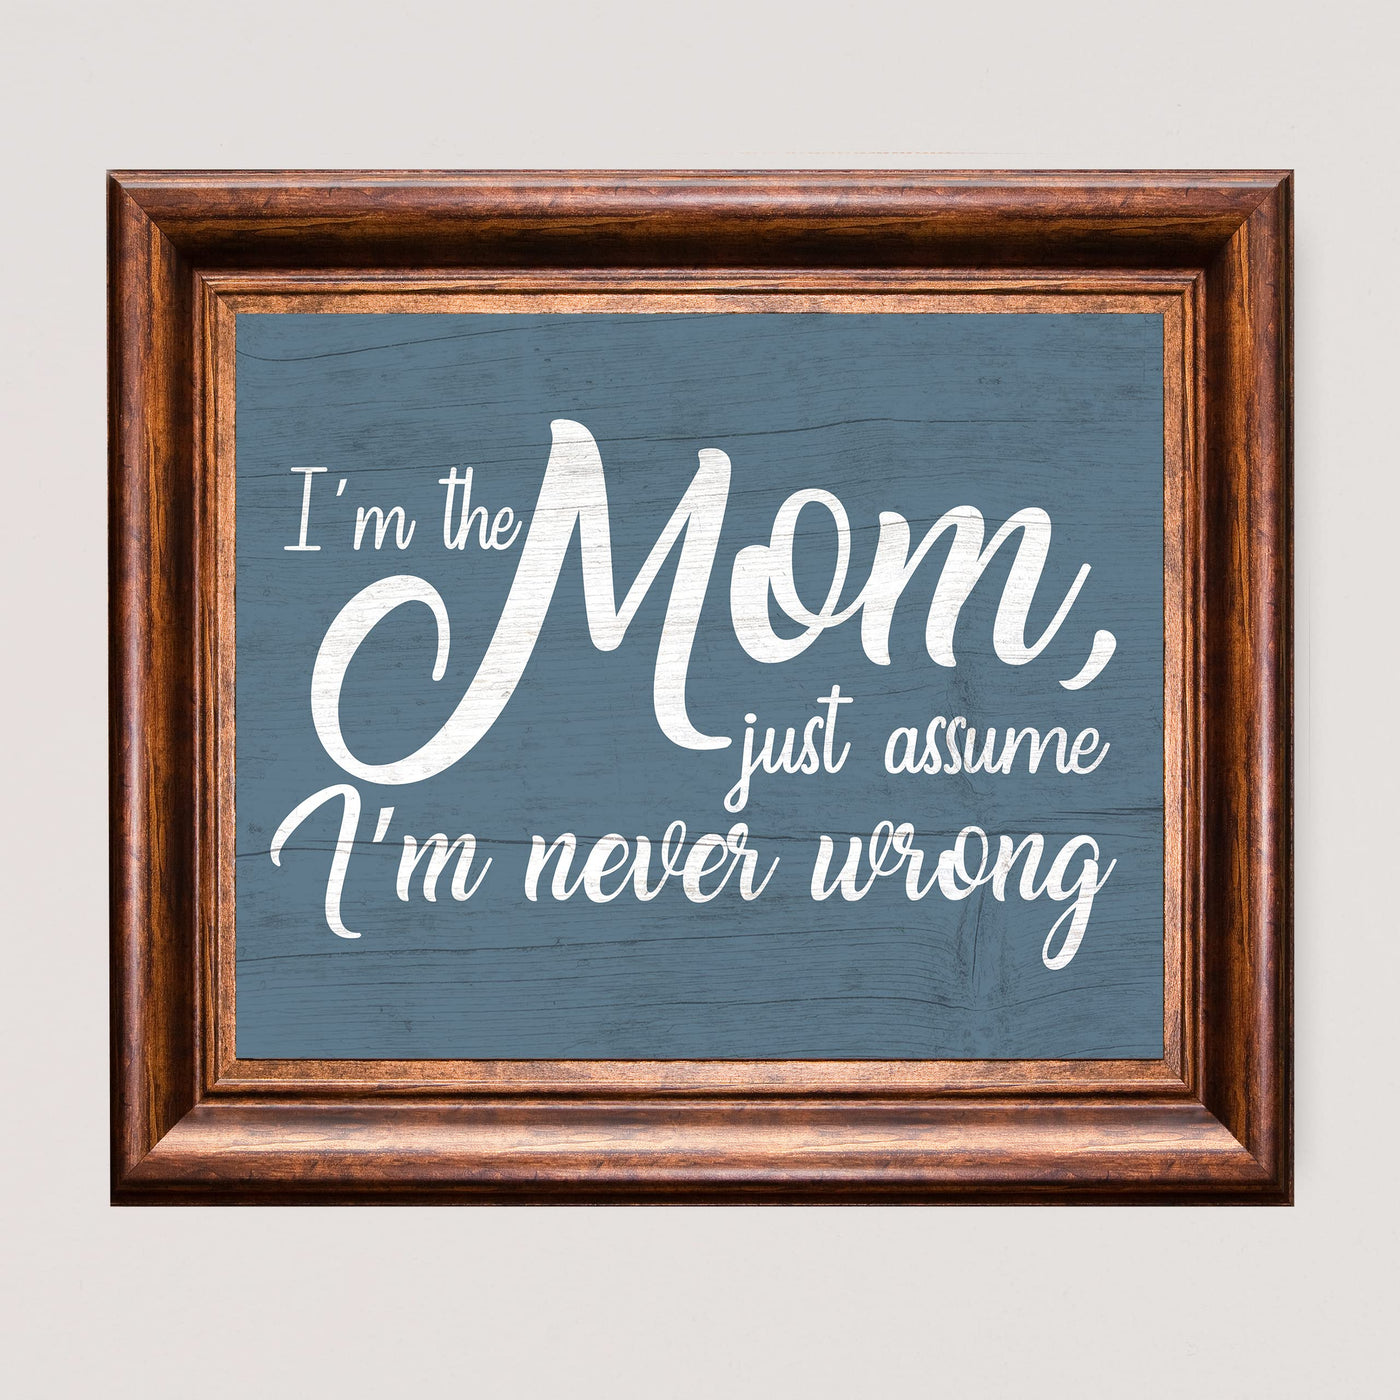 I'm the Mom, Just Assume I'm Never Wrong Funny Wall Art Sign -10 x 8" Rustic Typographic Poster Print-Ready to Frame. Humorous Decoration for Home-Family Room-Patio Decor. Fun Gift for All Moms!